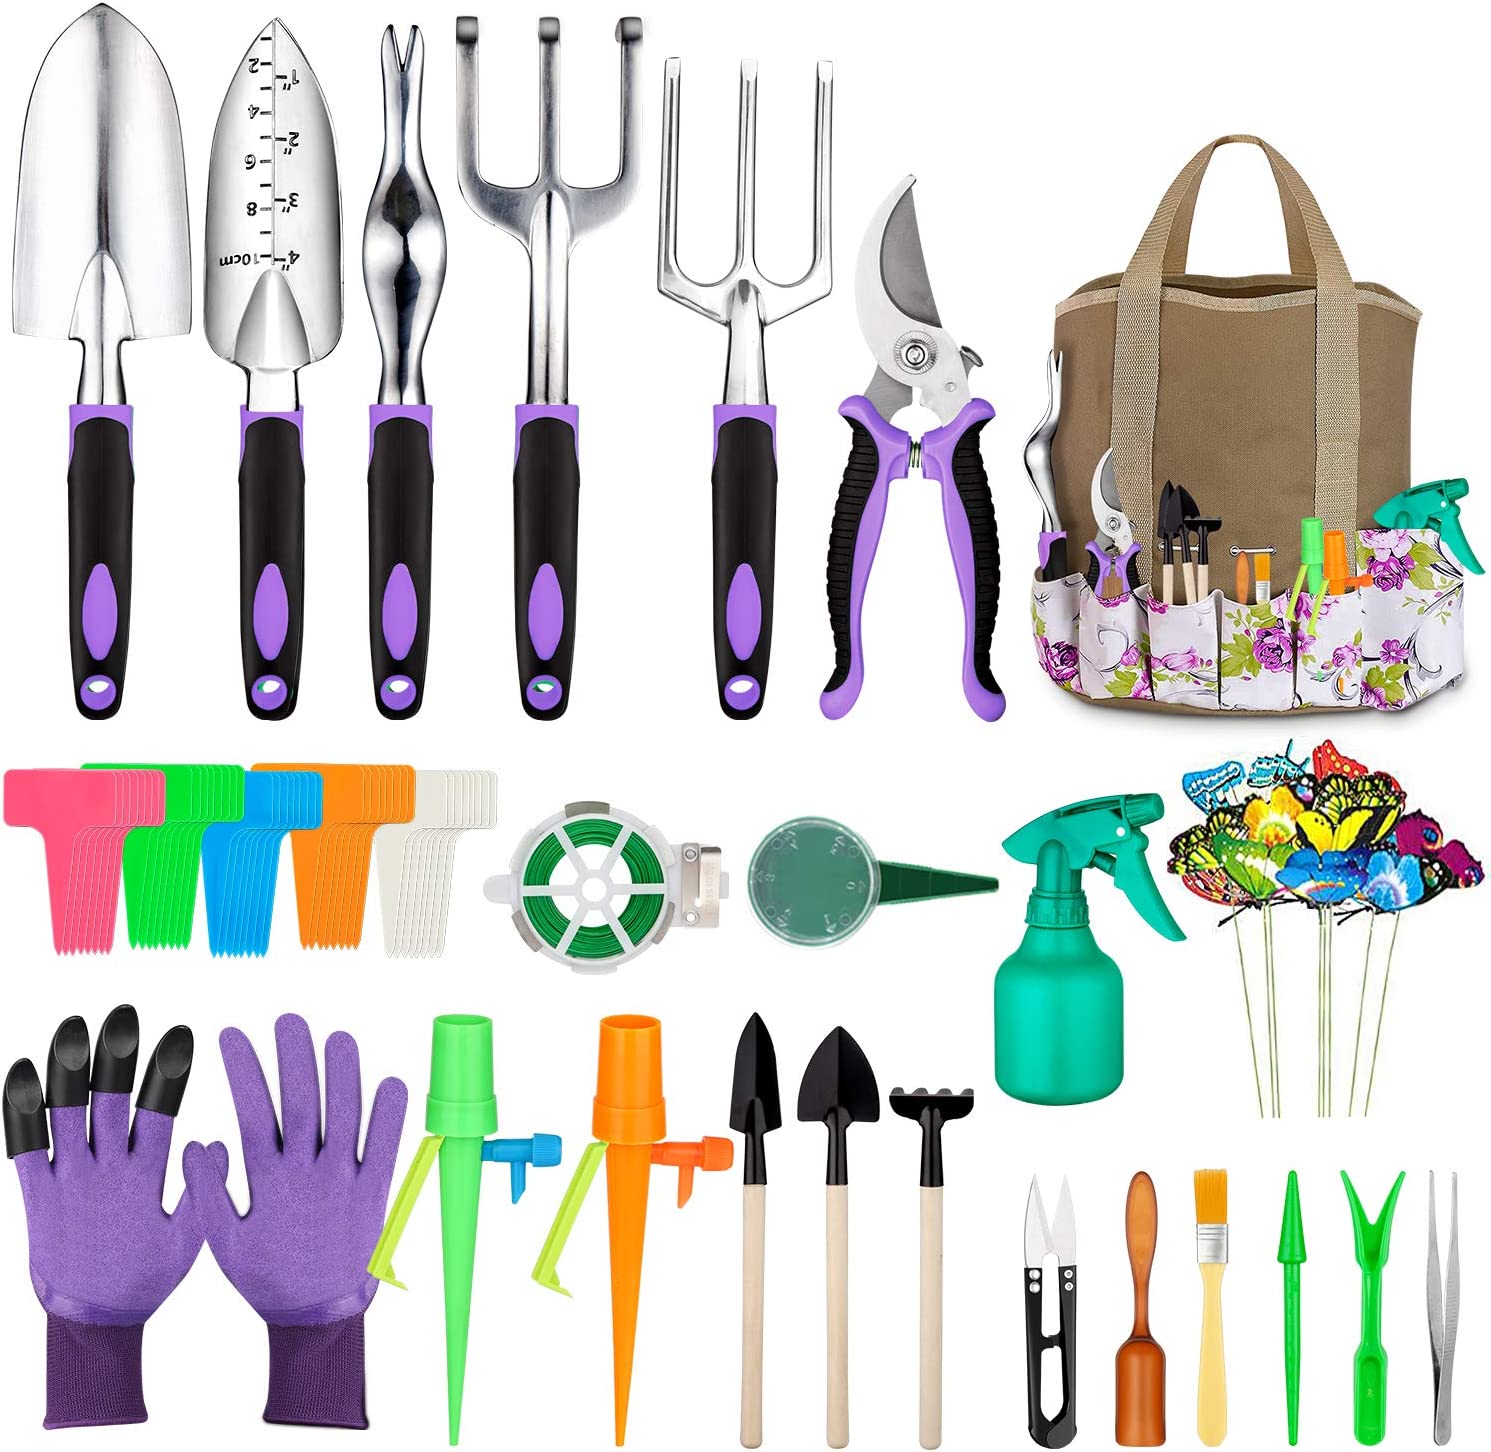 Tudoccy All-In-One Anti-Rust Garden Tools, 83-Piece